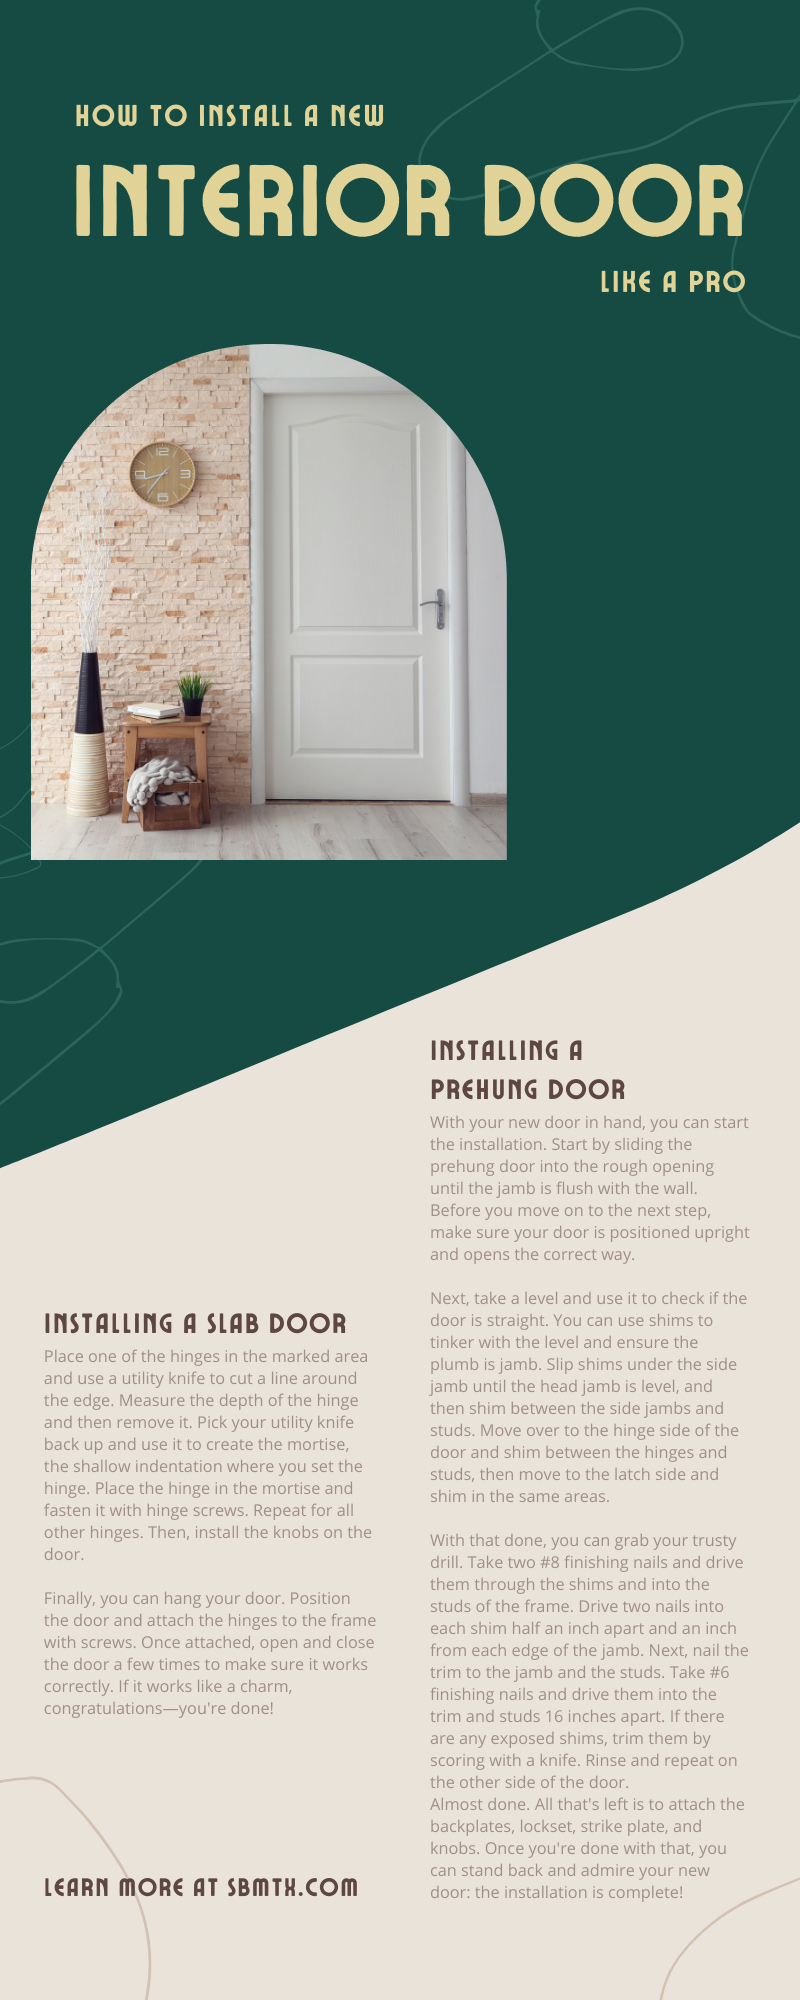 How To Install a New Interior Door Like a Pro